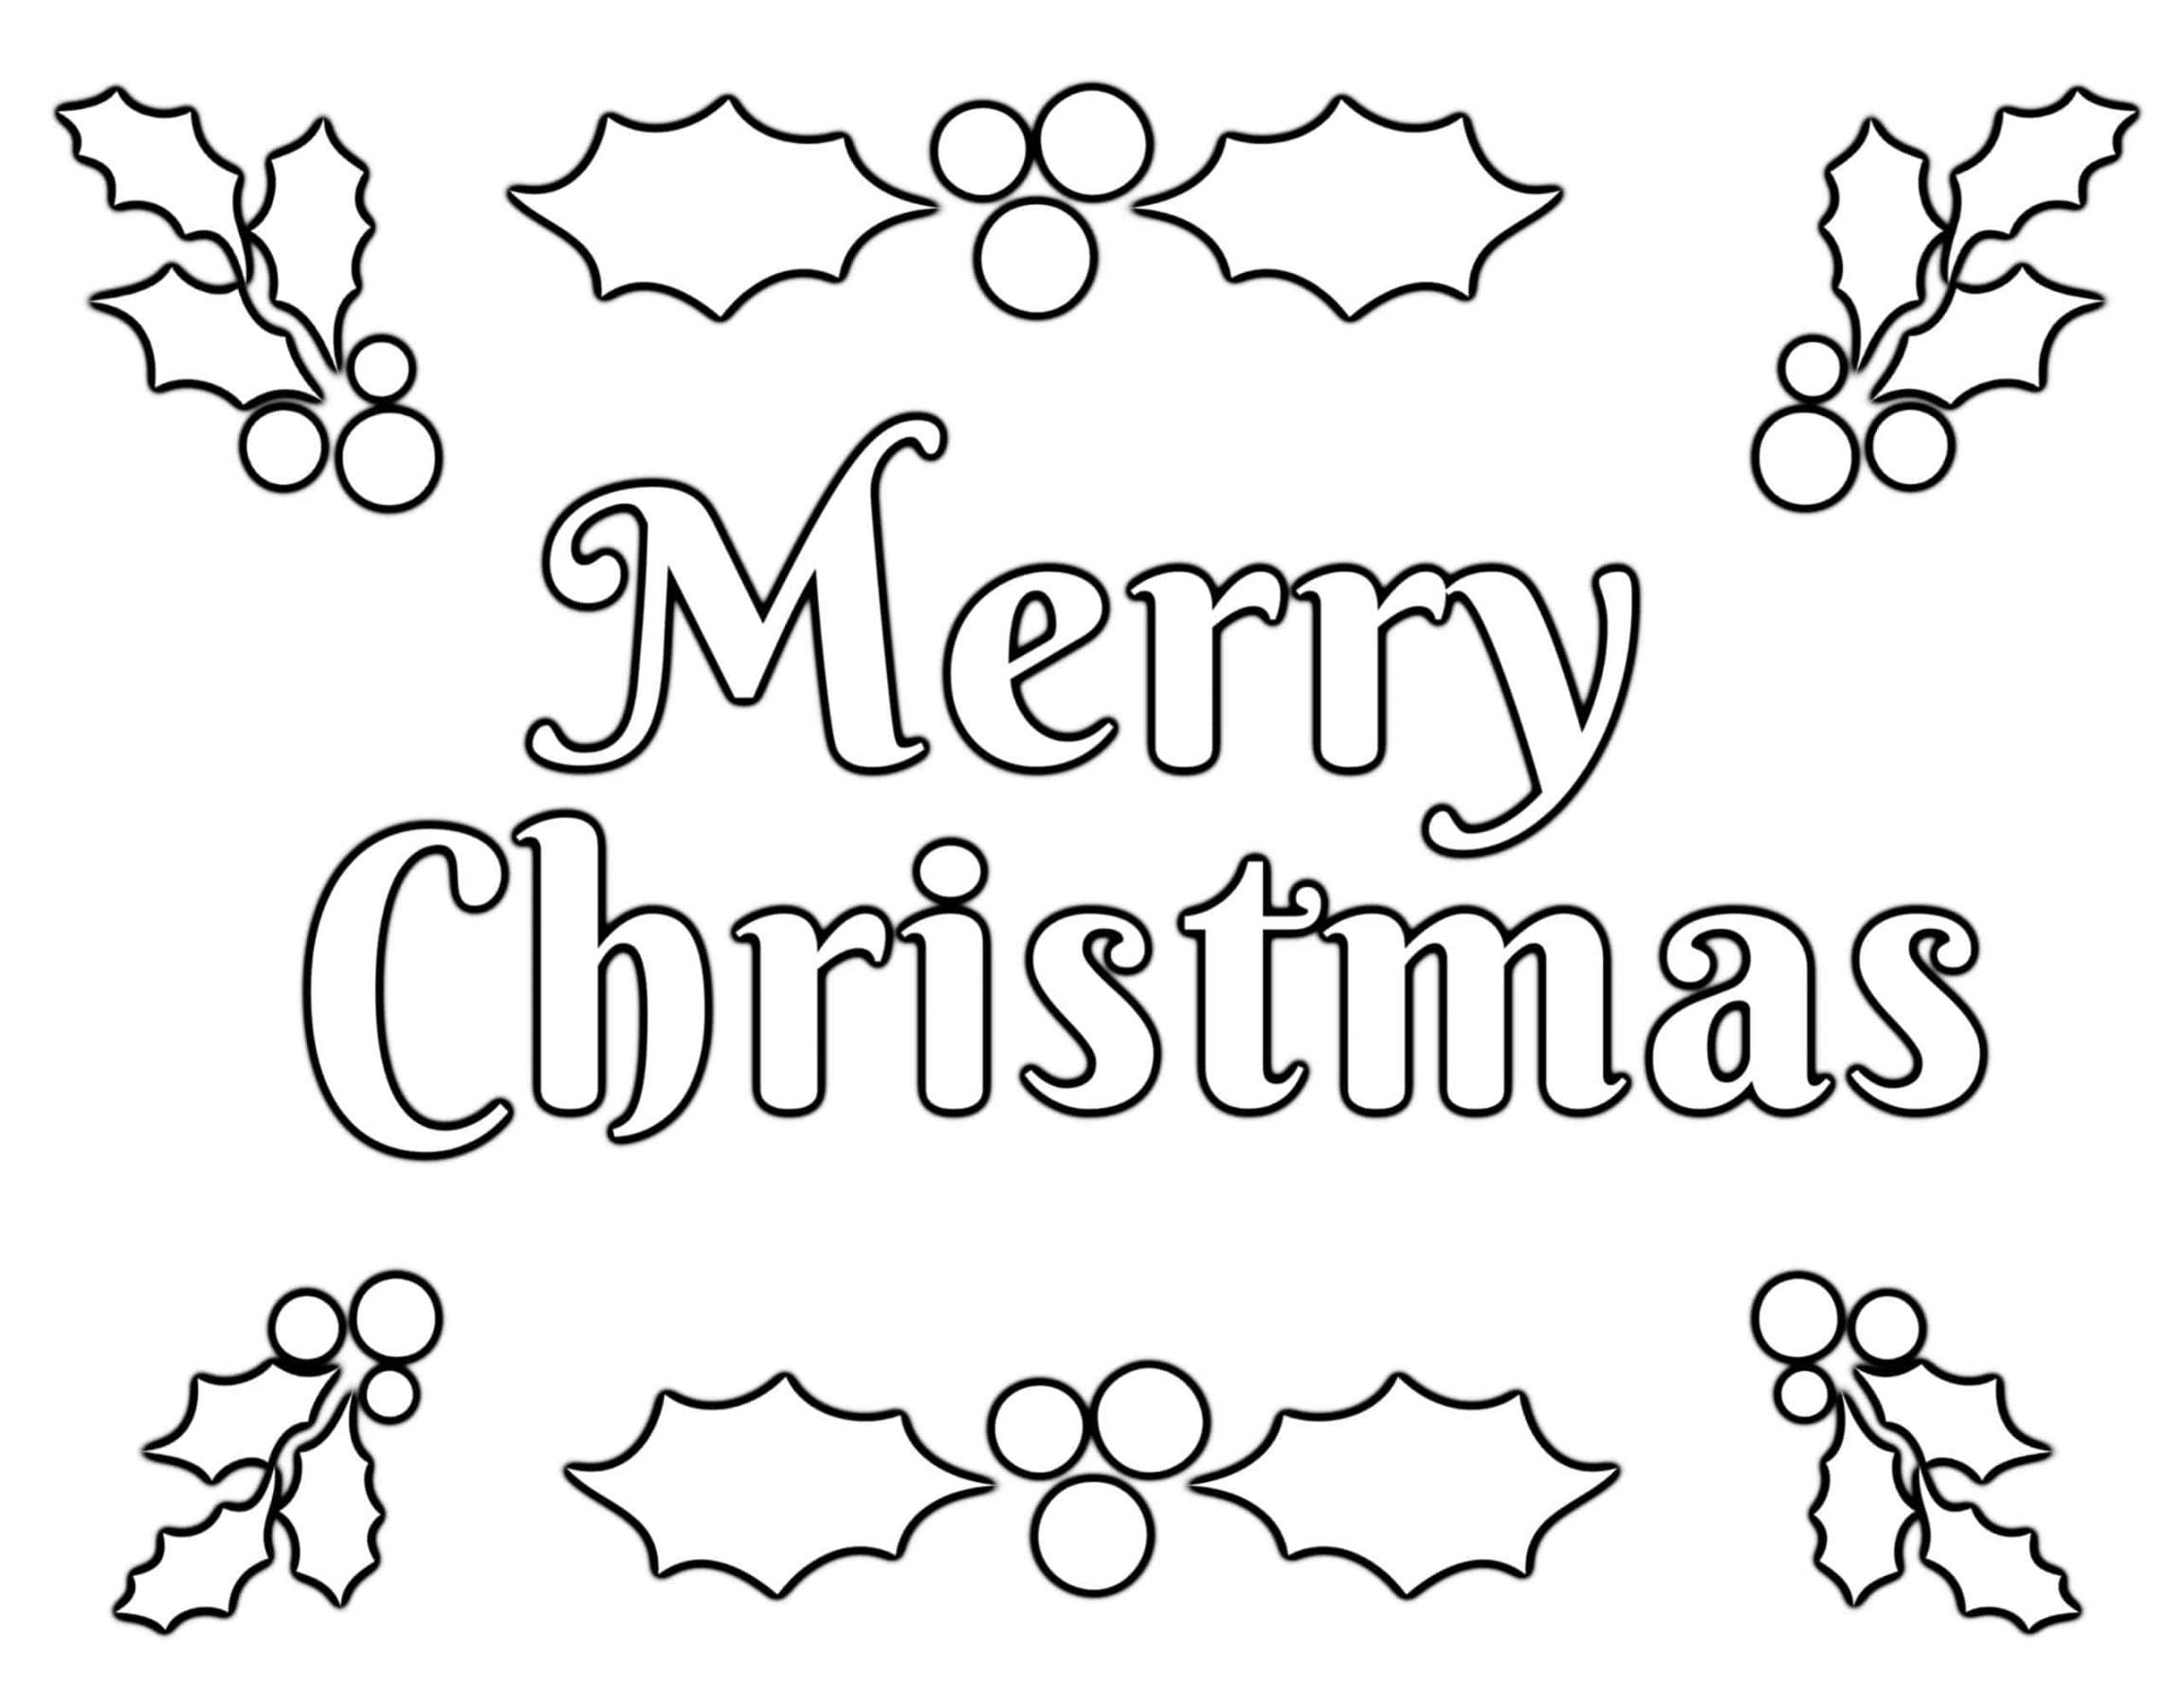 Christmas Coloring Pages Free Printable - Printable - Christmas Coloring Pages for Kids (% FREE) Easy Printable PDF